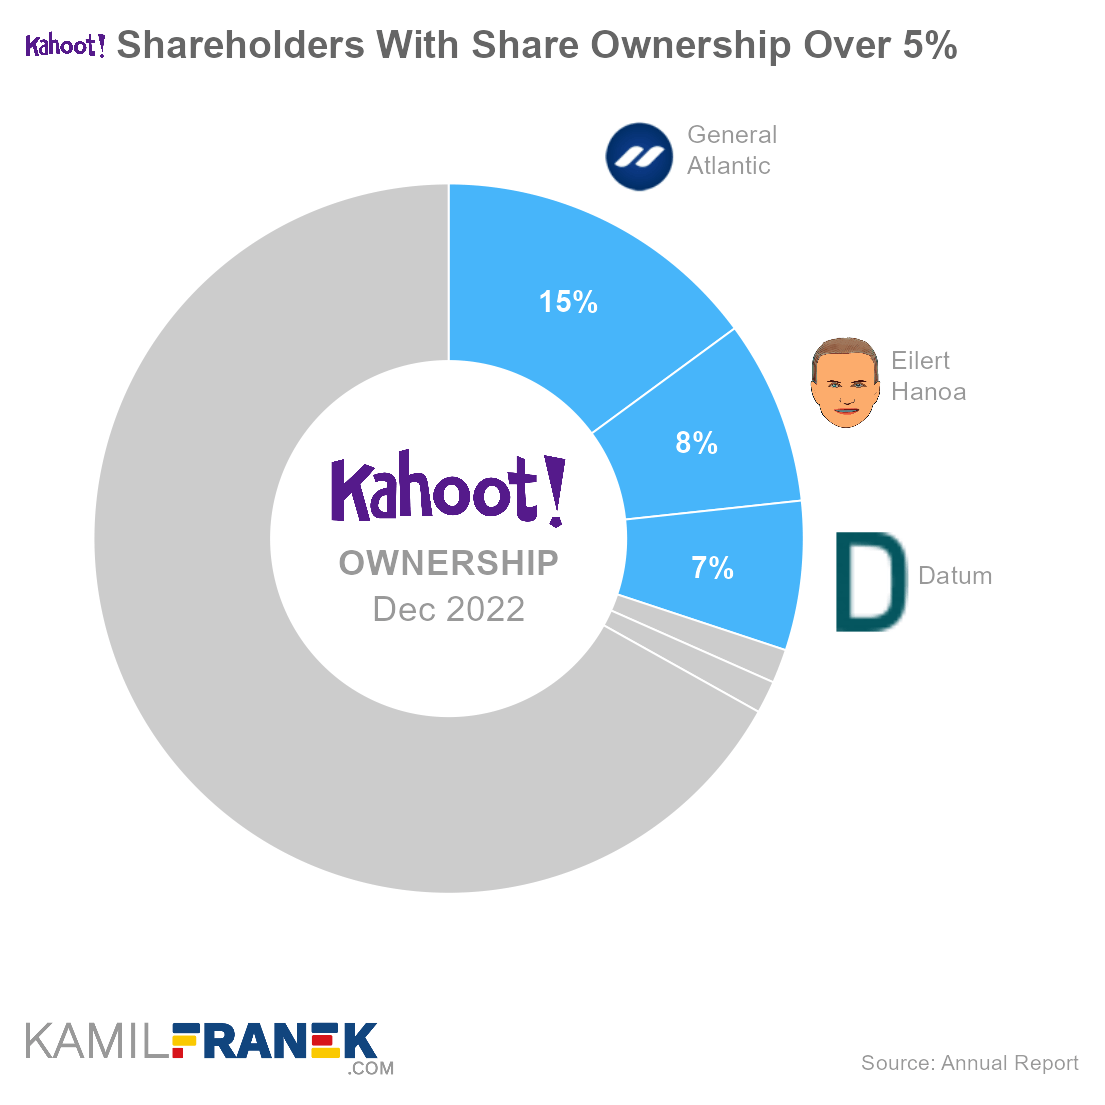 Who owns Kahoot!, largest shareholders donut chart